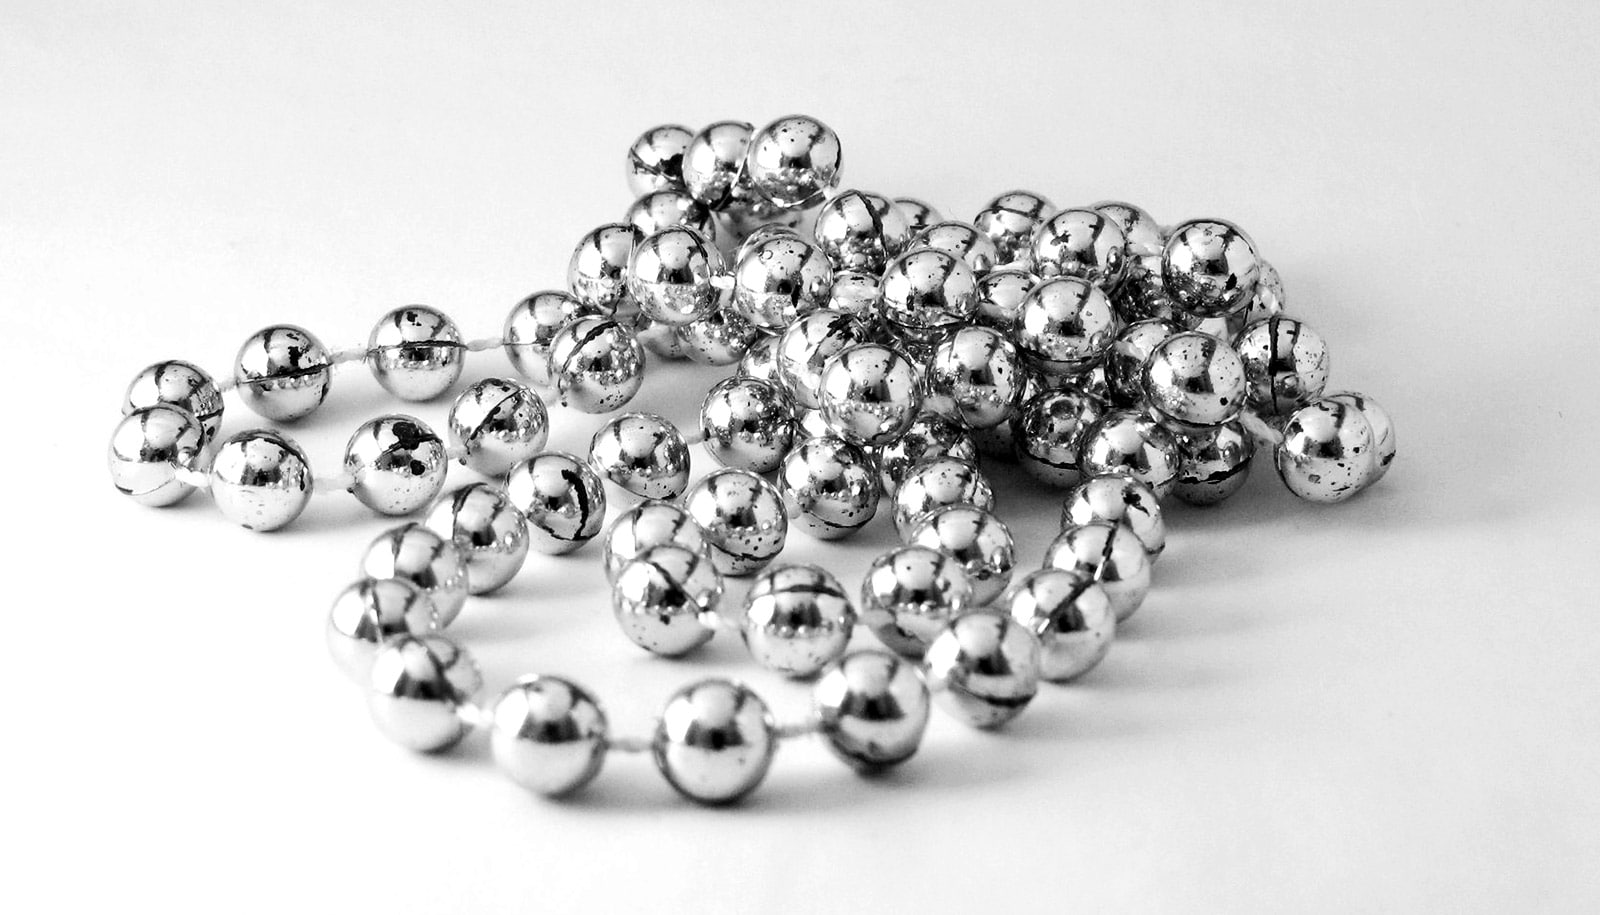 A necklace of silver-looking beads sits on a white surface.